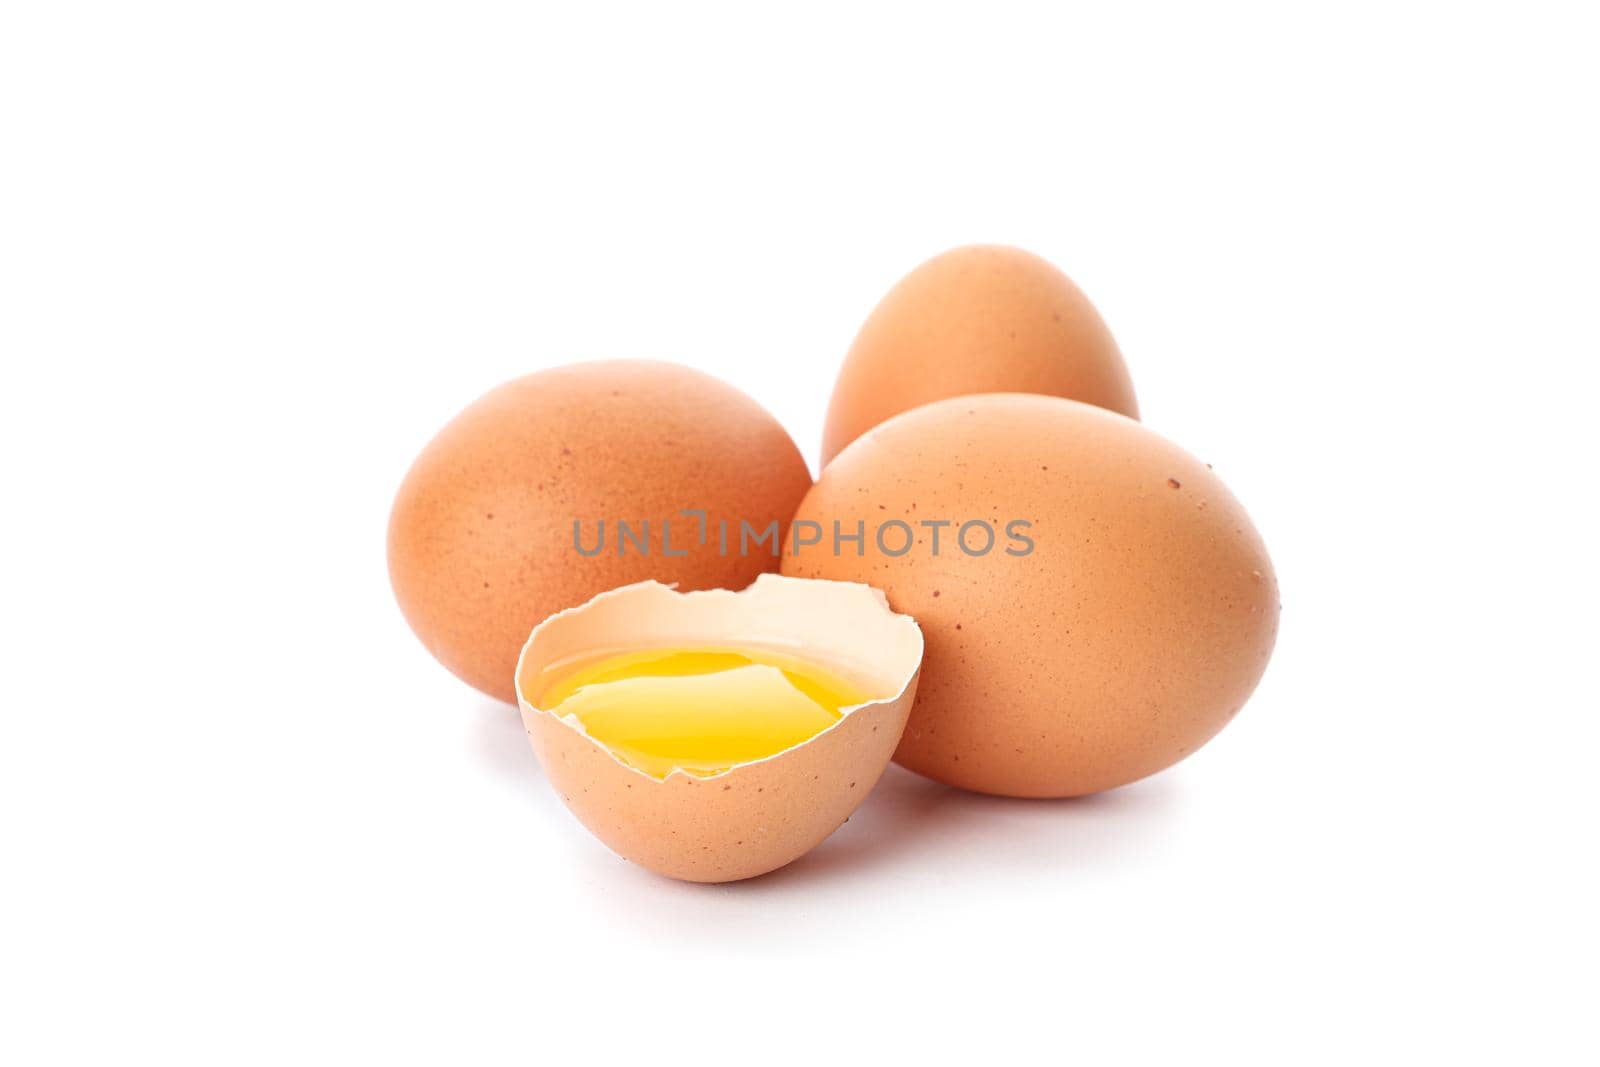 Chicken eggs and half broken egg with yolk  isolated on white background by AtlasCompany